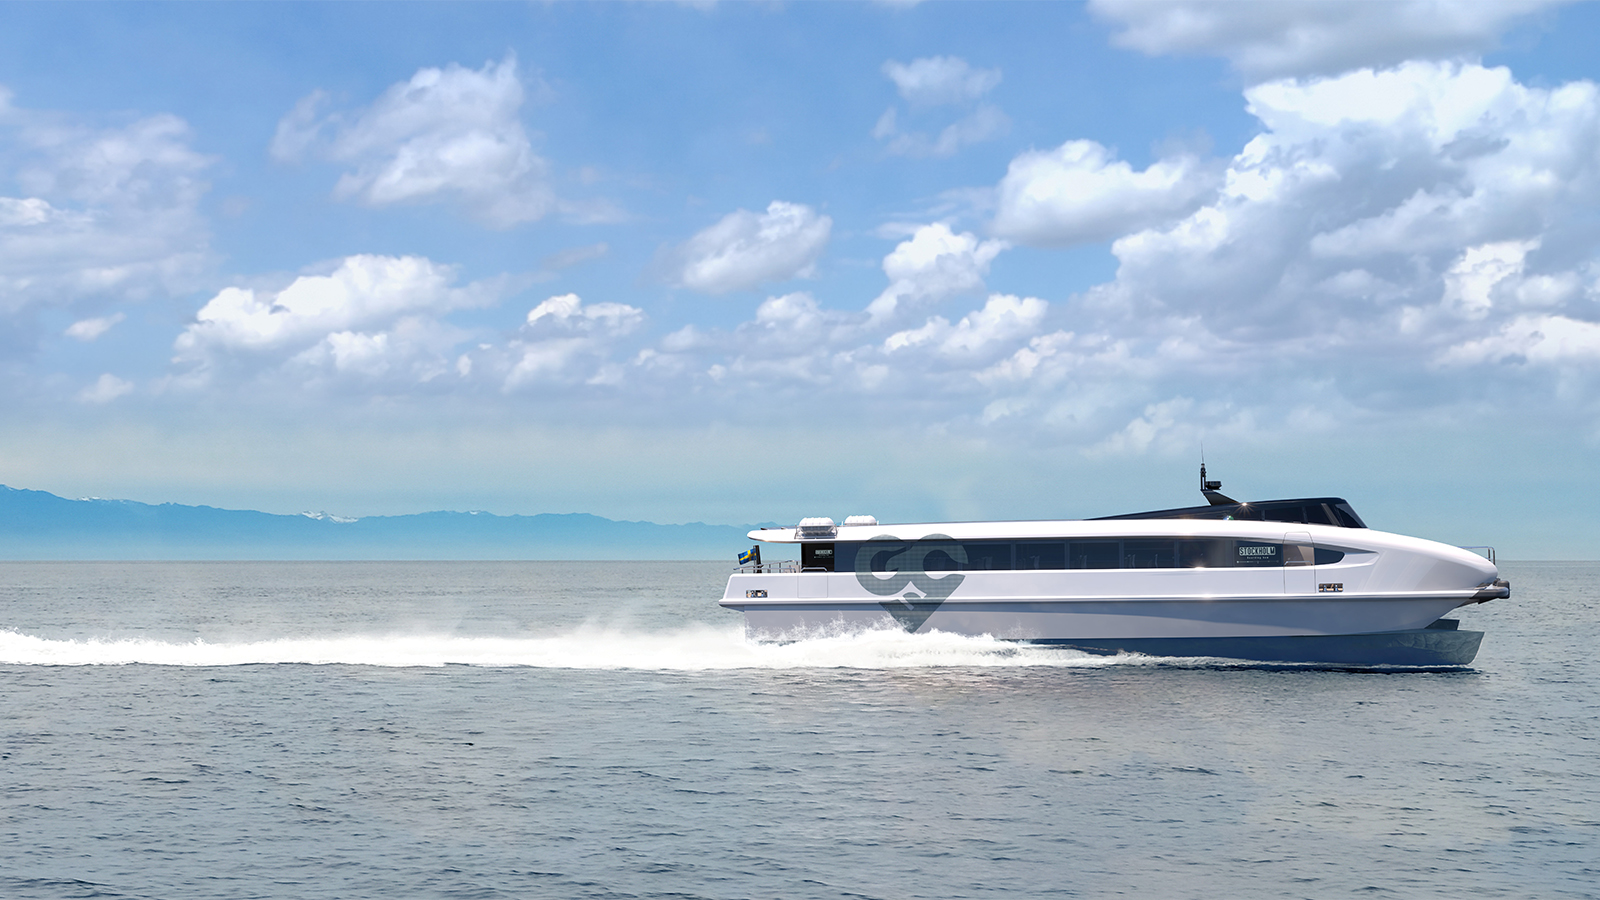 BAE Systems is proud to power Green City Ferries' Beluga24, the world's first high-speed emission-free catamaran passenger ferry